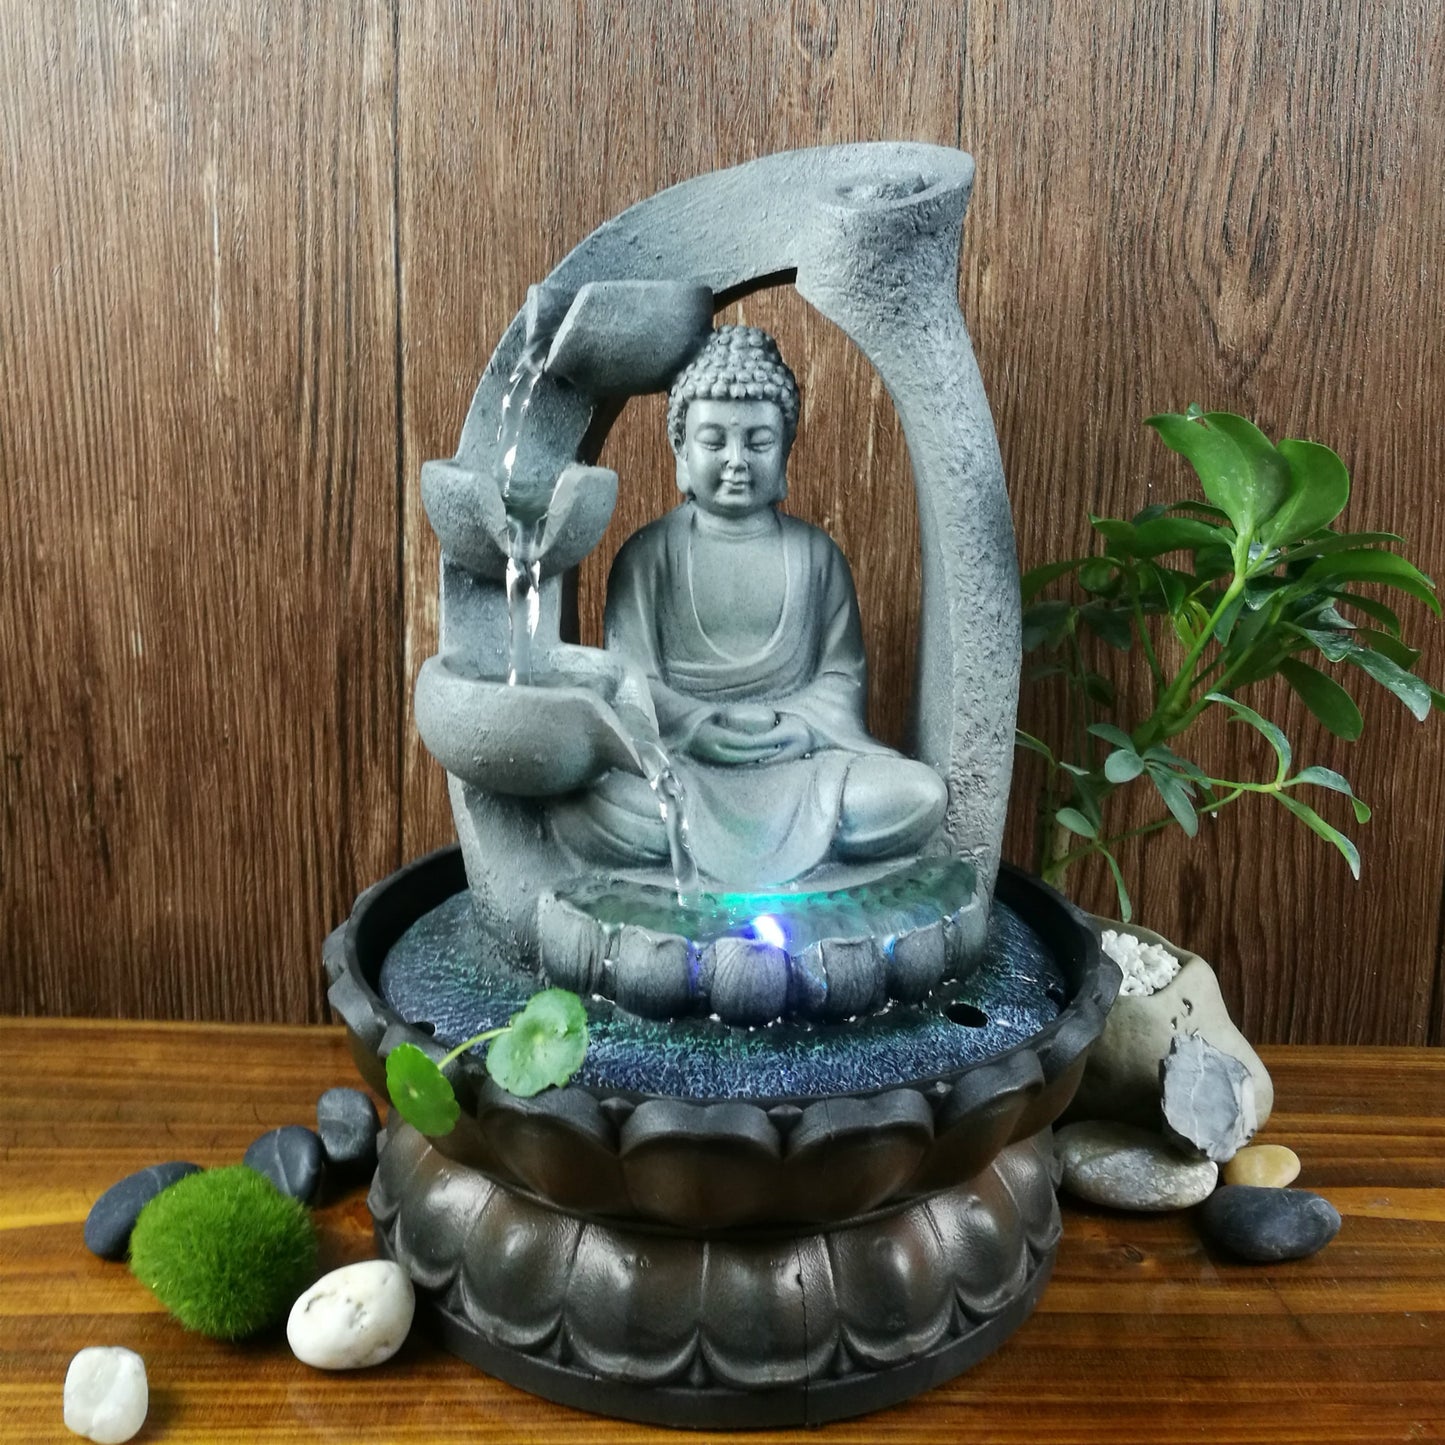 Creative Buddha Statue Resin Flowing Water Ornaments